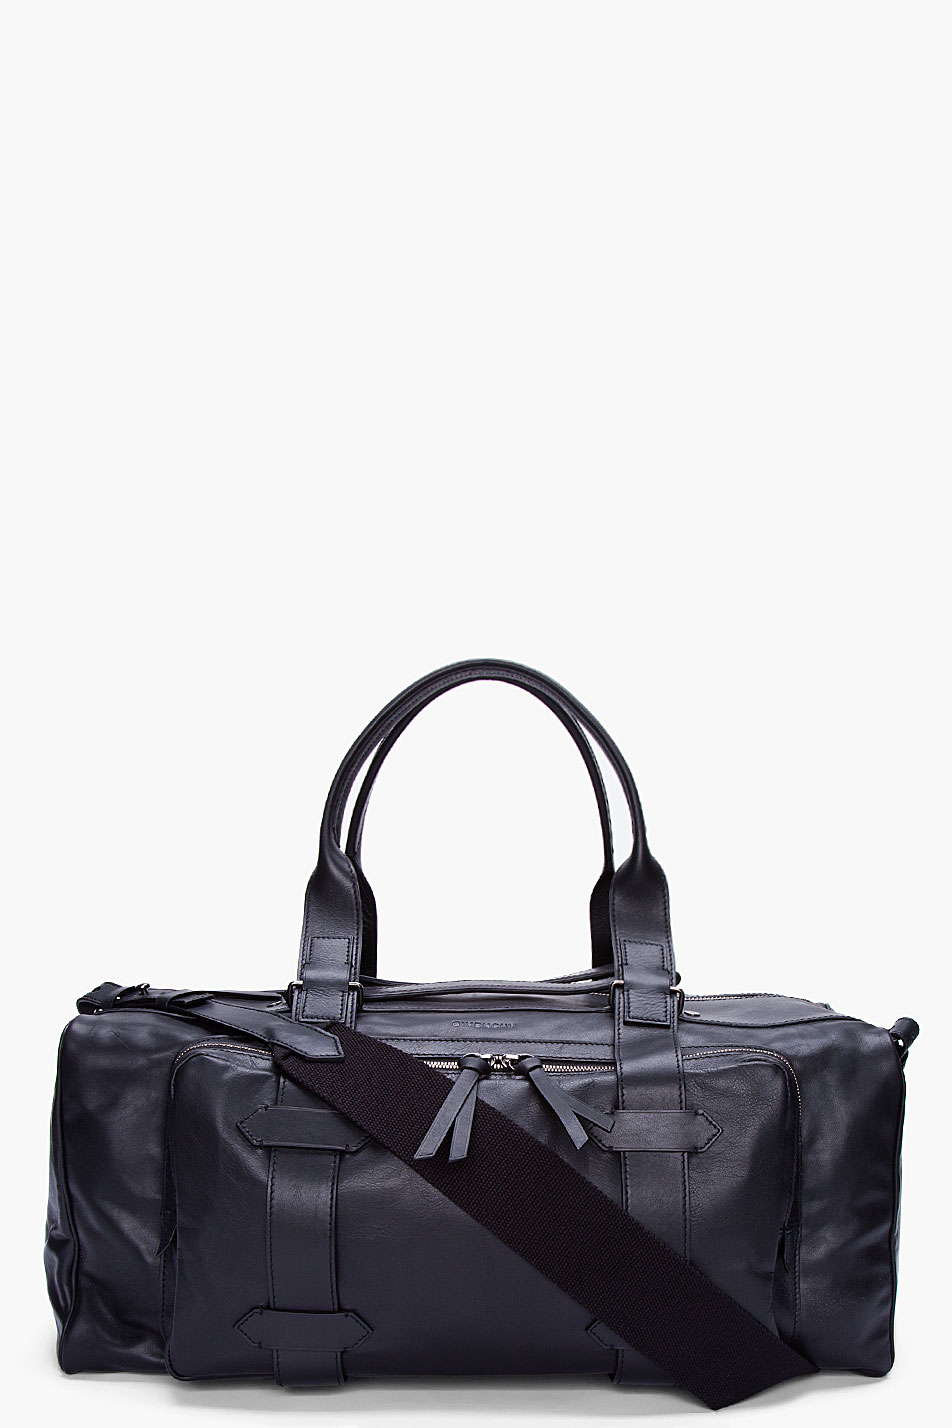 Givenchy Black Leather Carry All Duffle Bag in Black for Men | Lyst